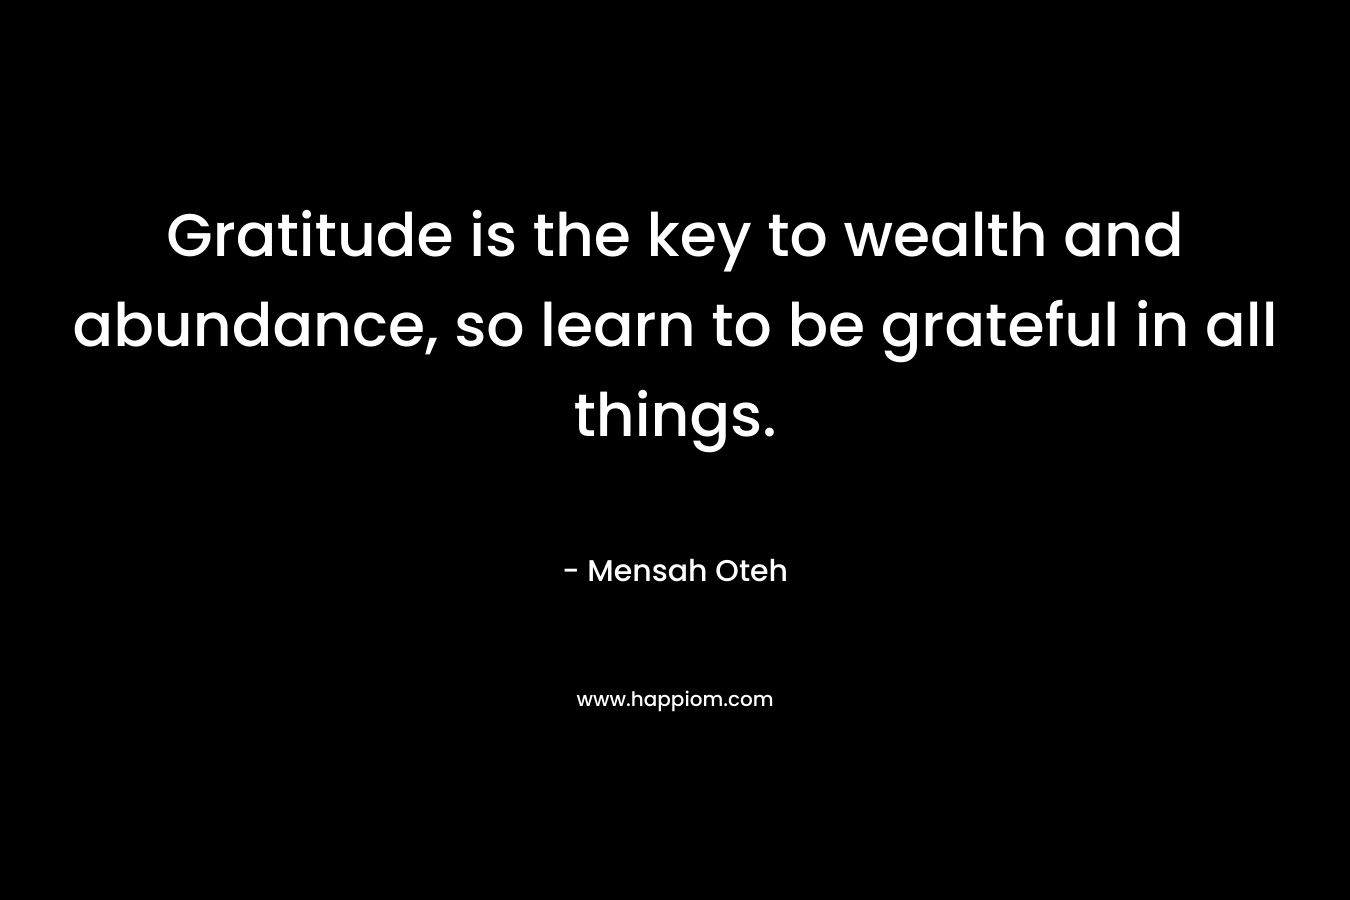 Gratitude is the key to wealth and abundance, so learn to be grateful in all things.